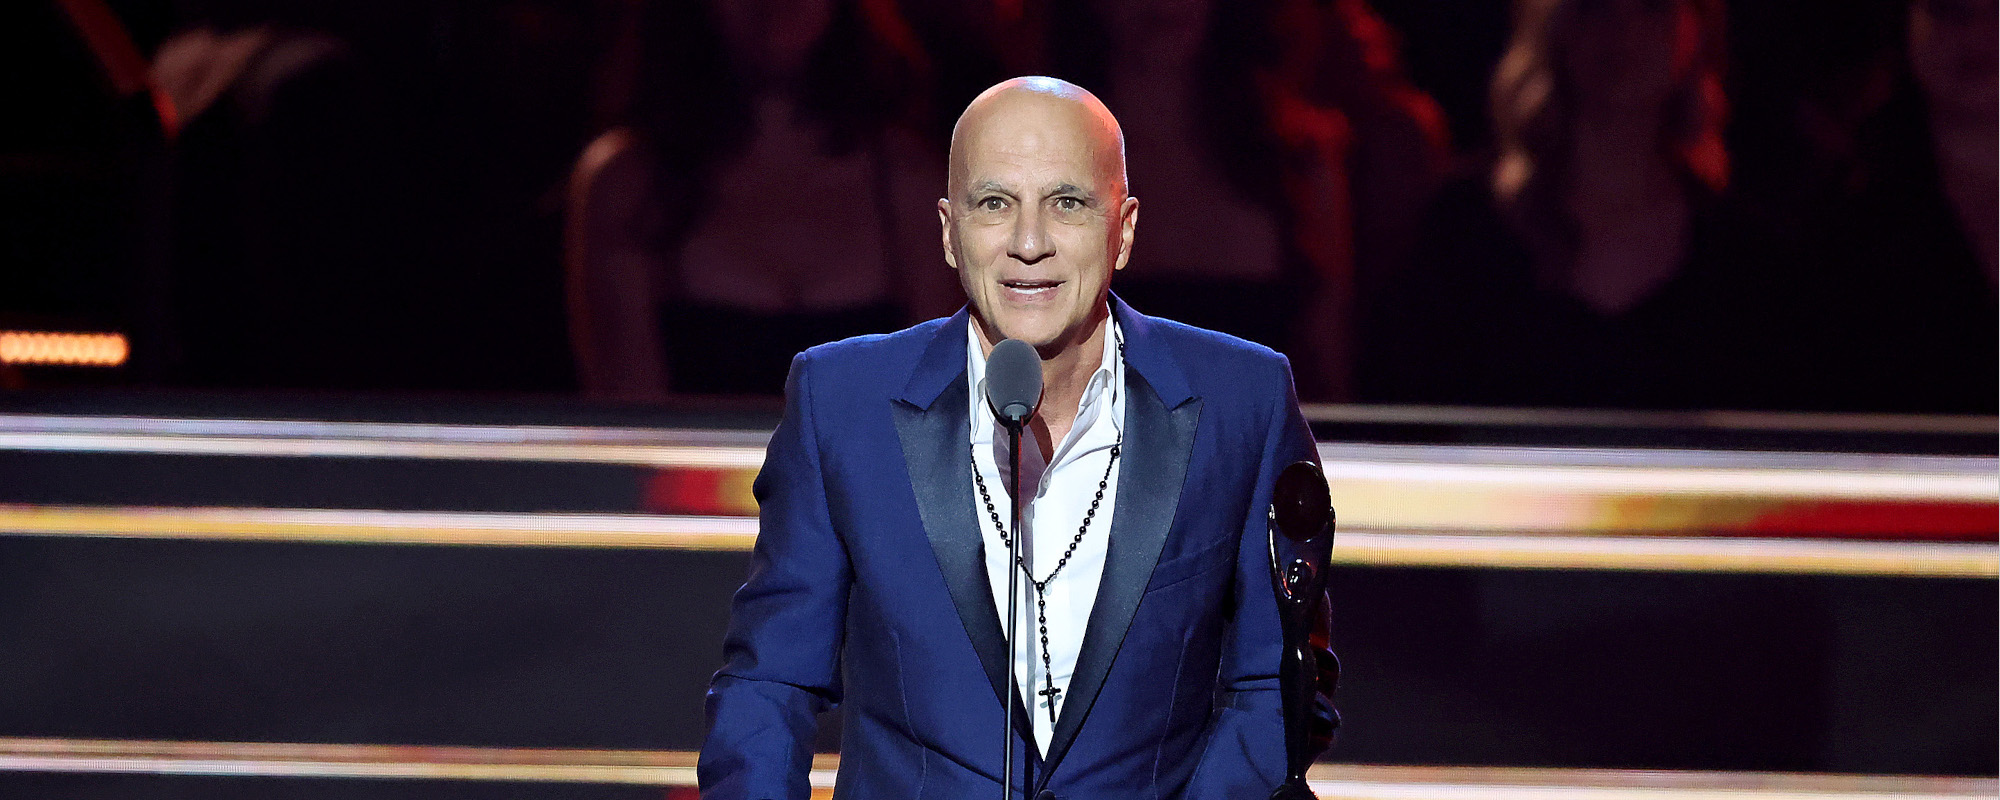 Jimmy Iovine Gives Thoughts on Current Music Landscape: “Fame Has Replaced Great”